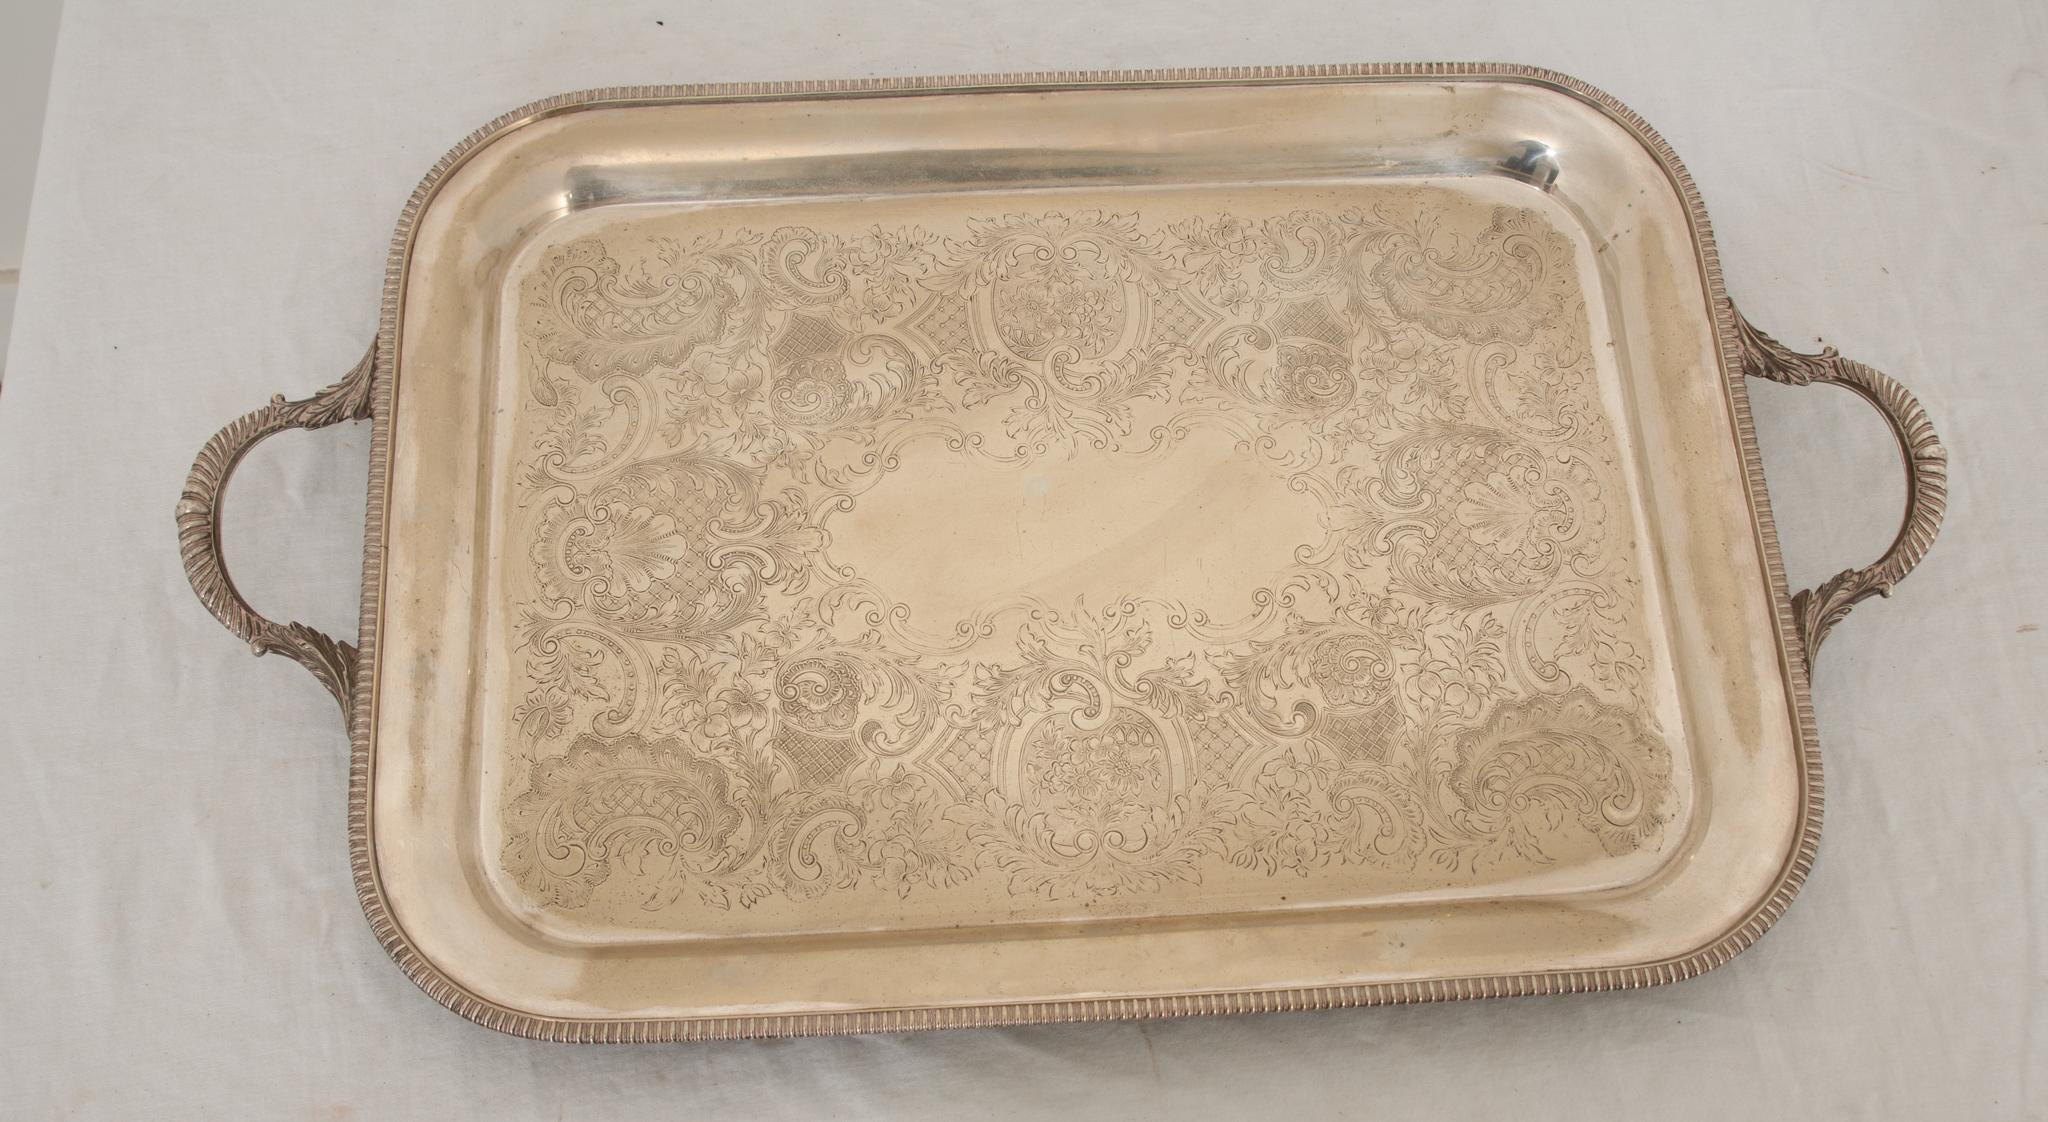 A superb English silver plated tray. This rectangular tray features a deep set gadrooned border with elegant handles and is decorated with fanciful symmetrical engravings of floral and filigree designs circling a center cartouche. The quality and